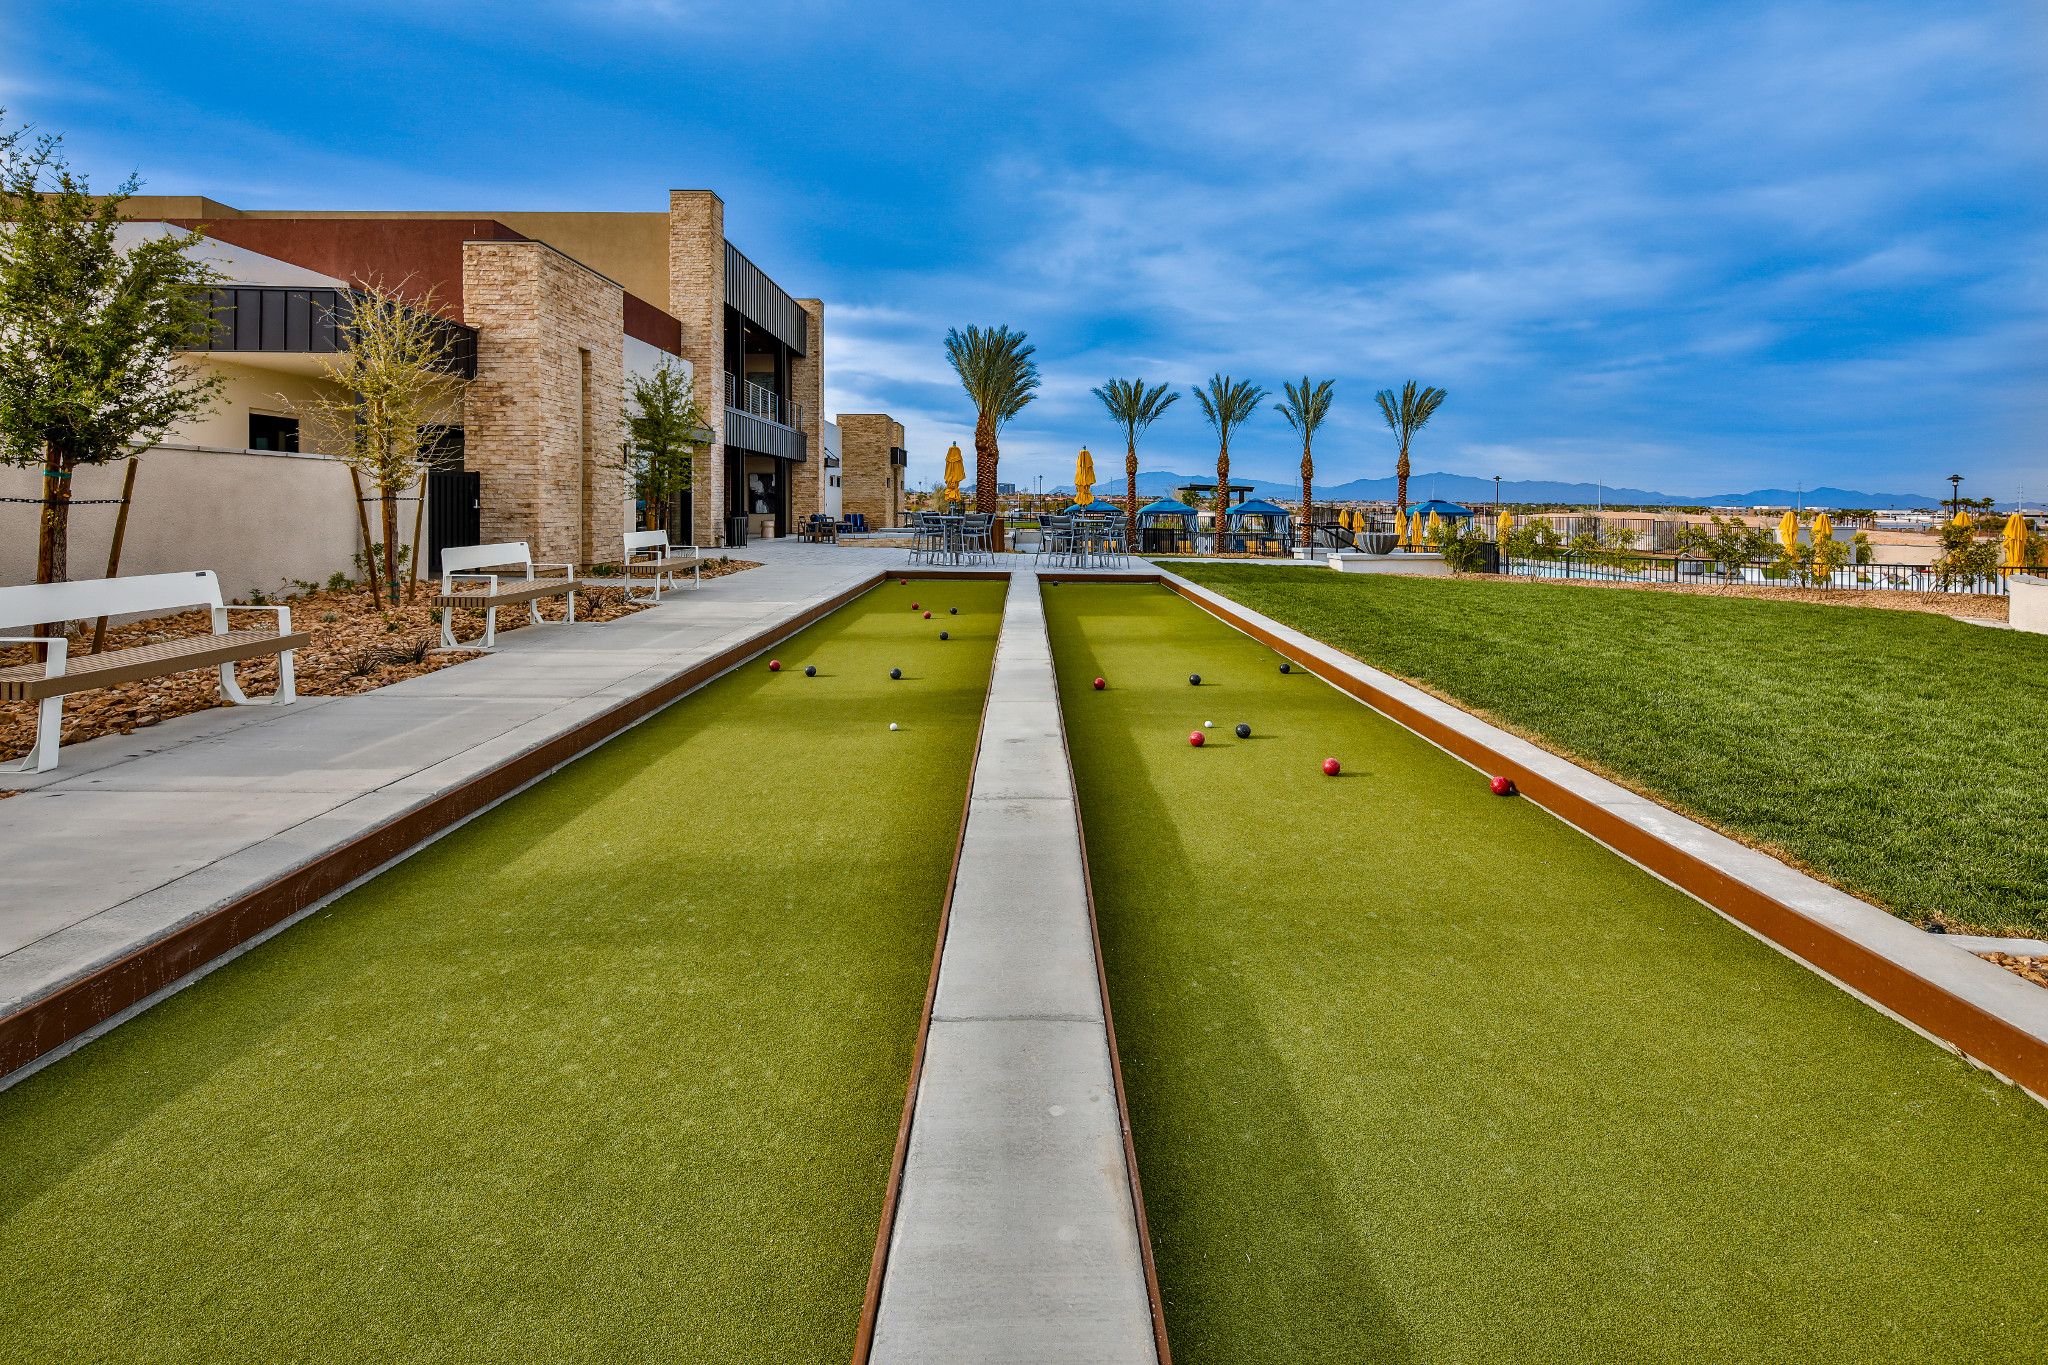 Trilogy Summerlin Bocce Ball Courts 